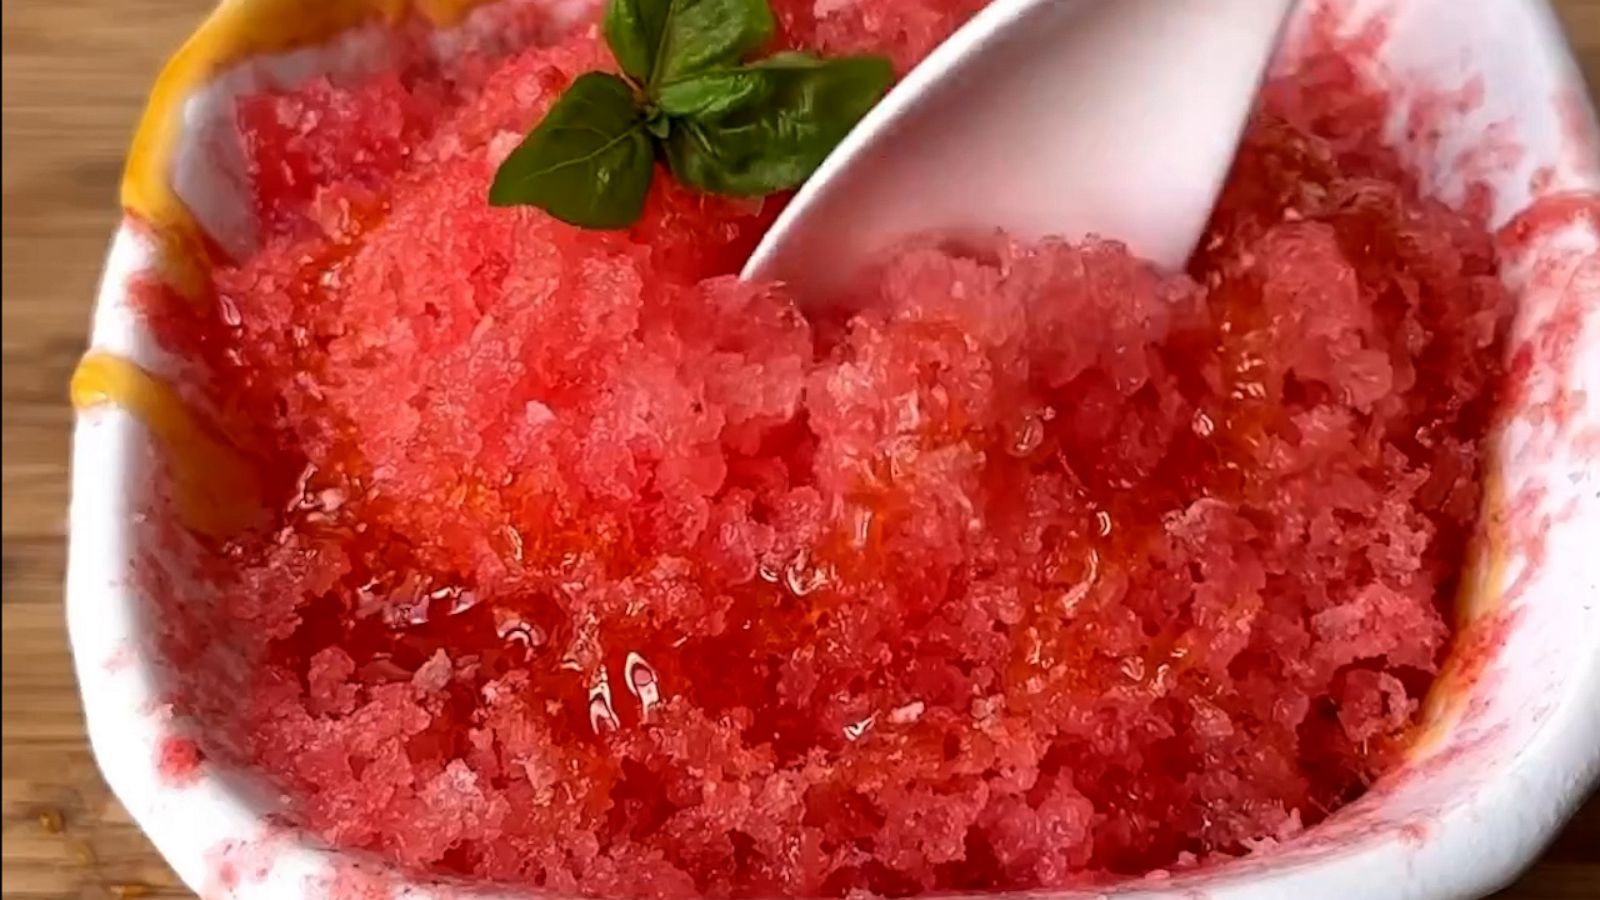 VIDEO: How to make this viral frozen shaved fruit treat